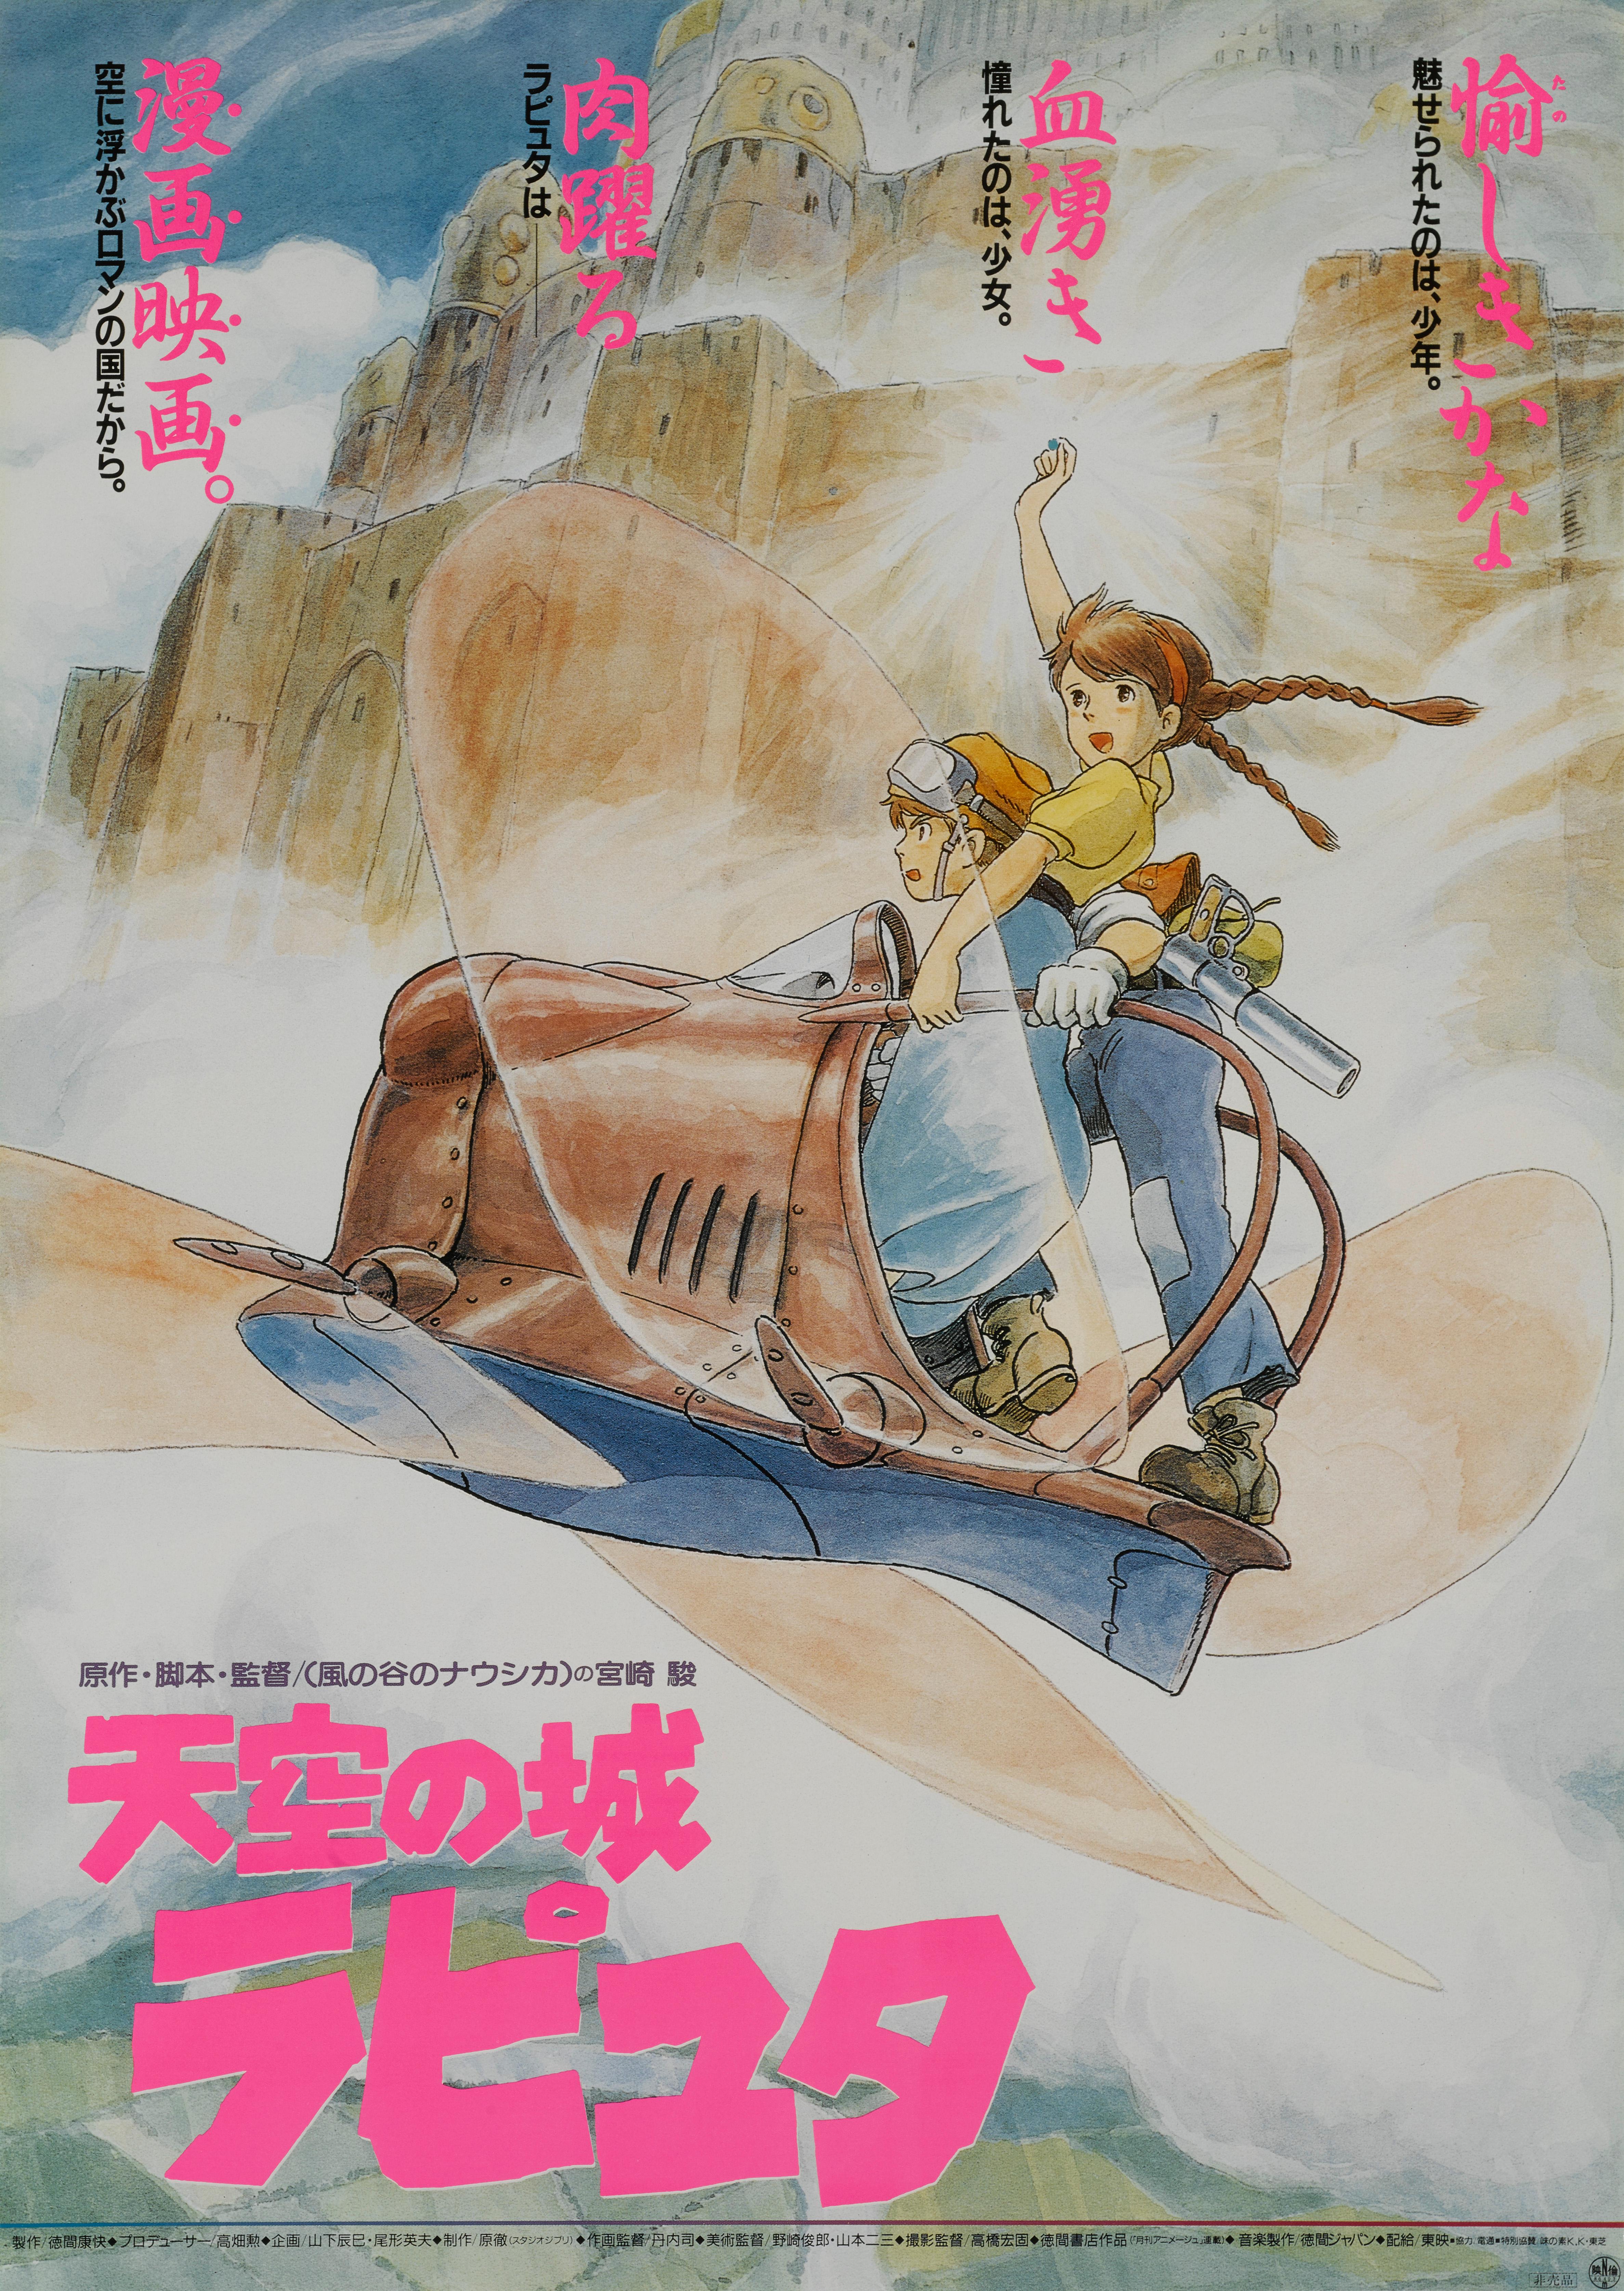 Original Japanese film poster for the 1986 Studio Ghibli Animation directed by Hayao Miyazaki.
This is the Style B poster much harder to find then the regular release poster.